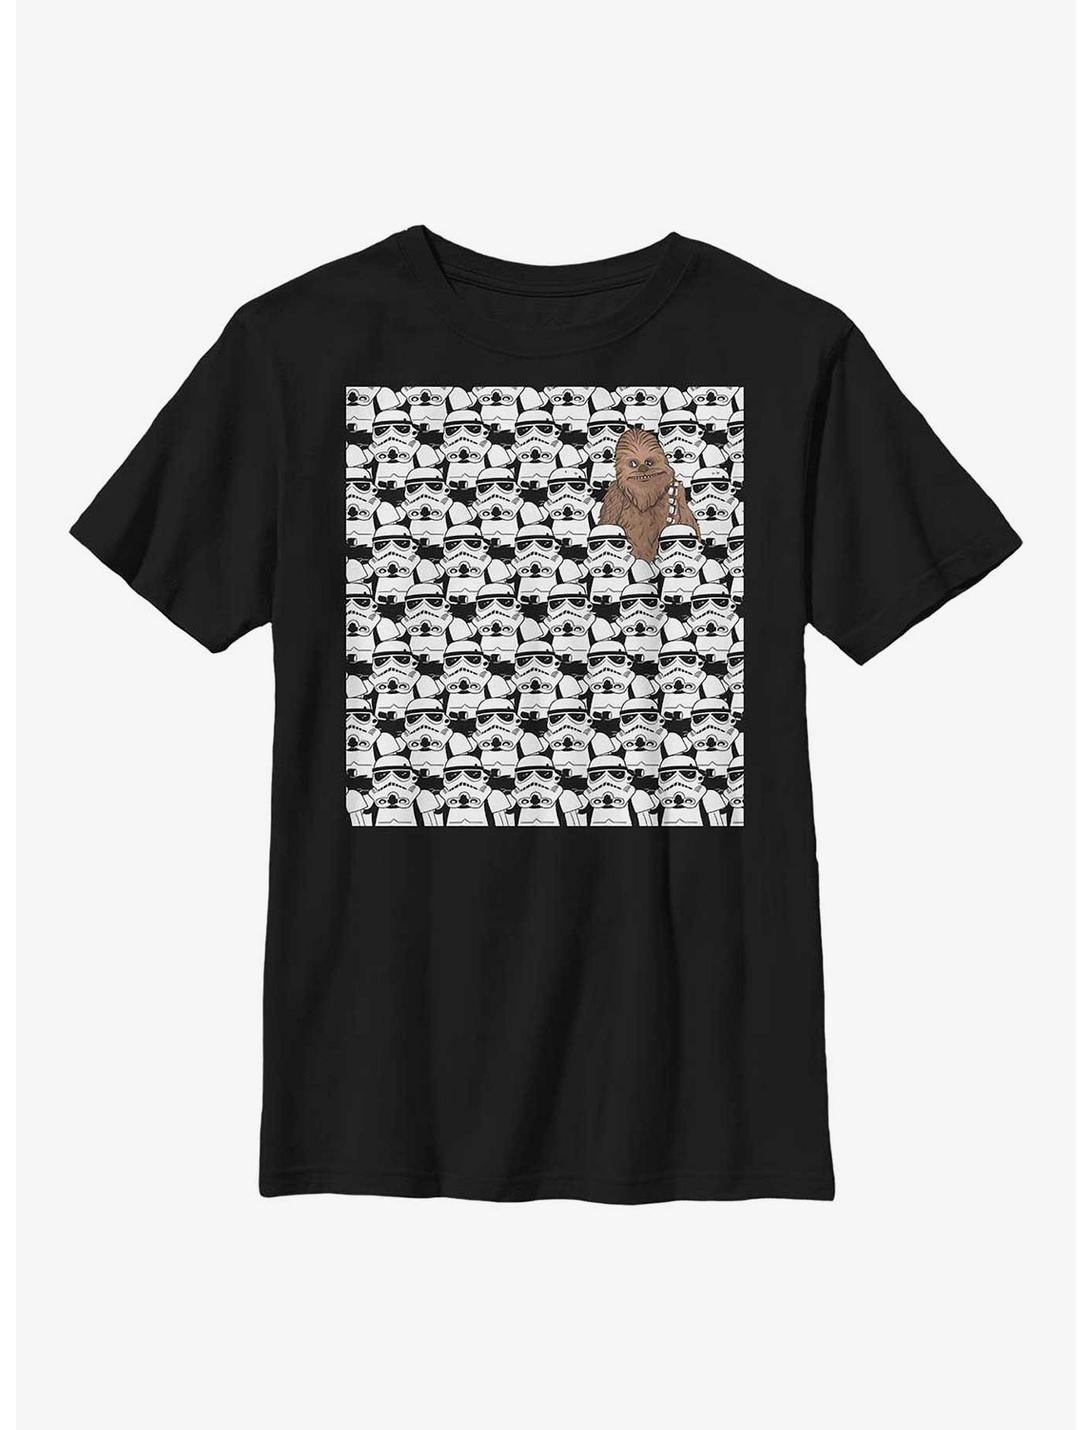 Star Wars Stormtrooper Chewbacca In Crowd Youth T-Shirt, BLACK, hi-res